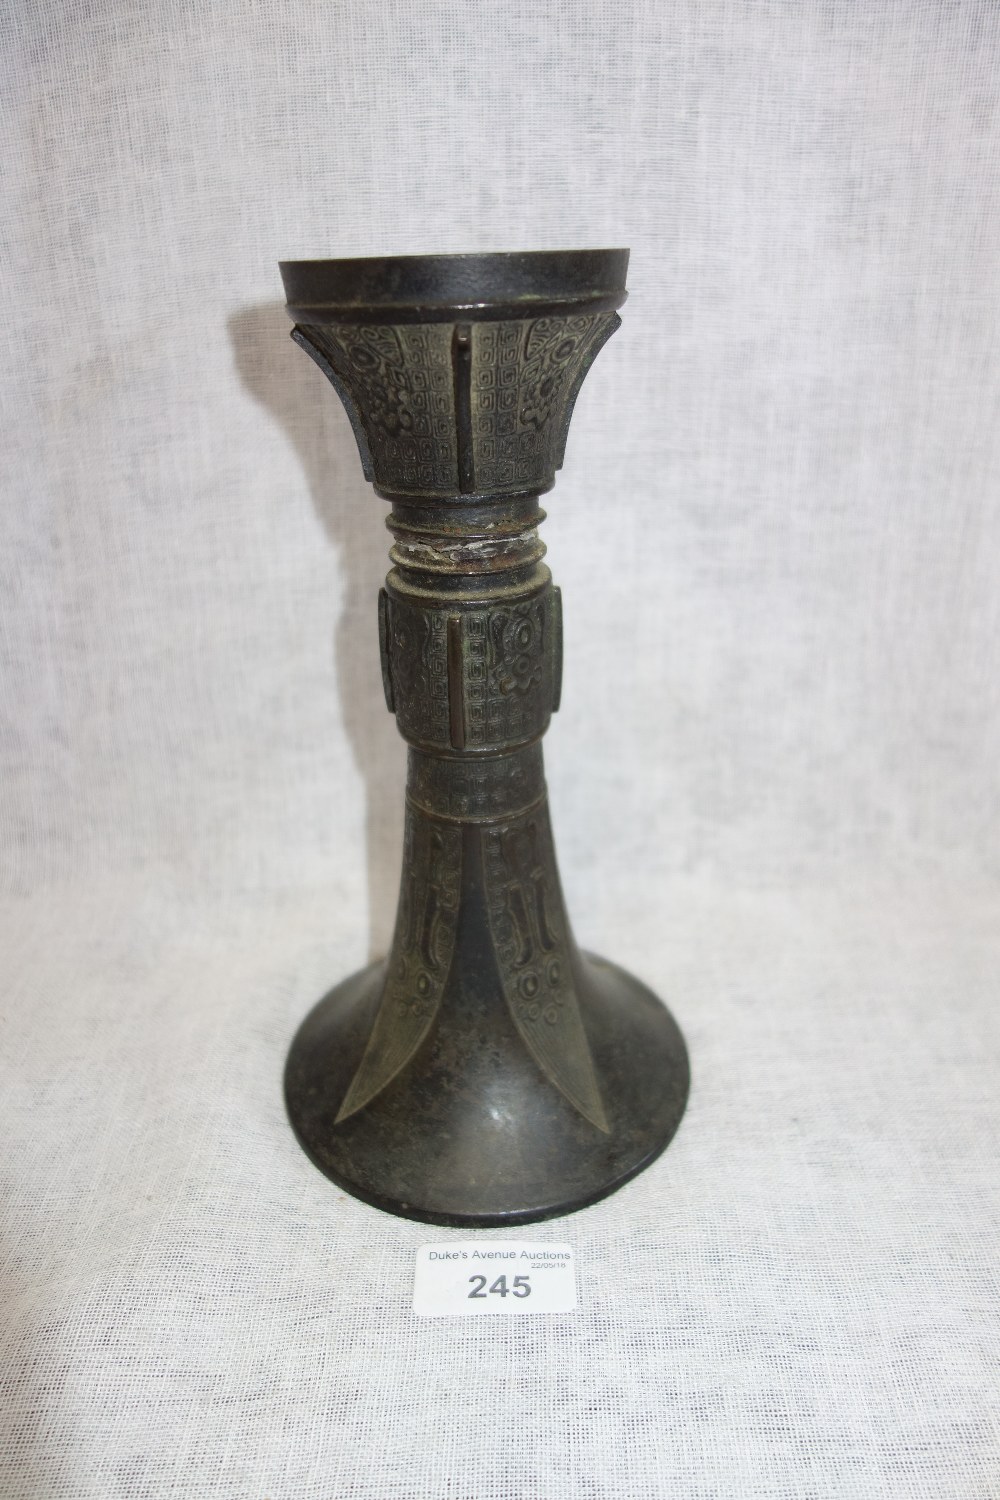 A LATE MING ARCADIAN BRONZE STAND of circular form, 22 cm high